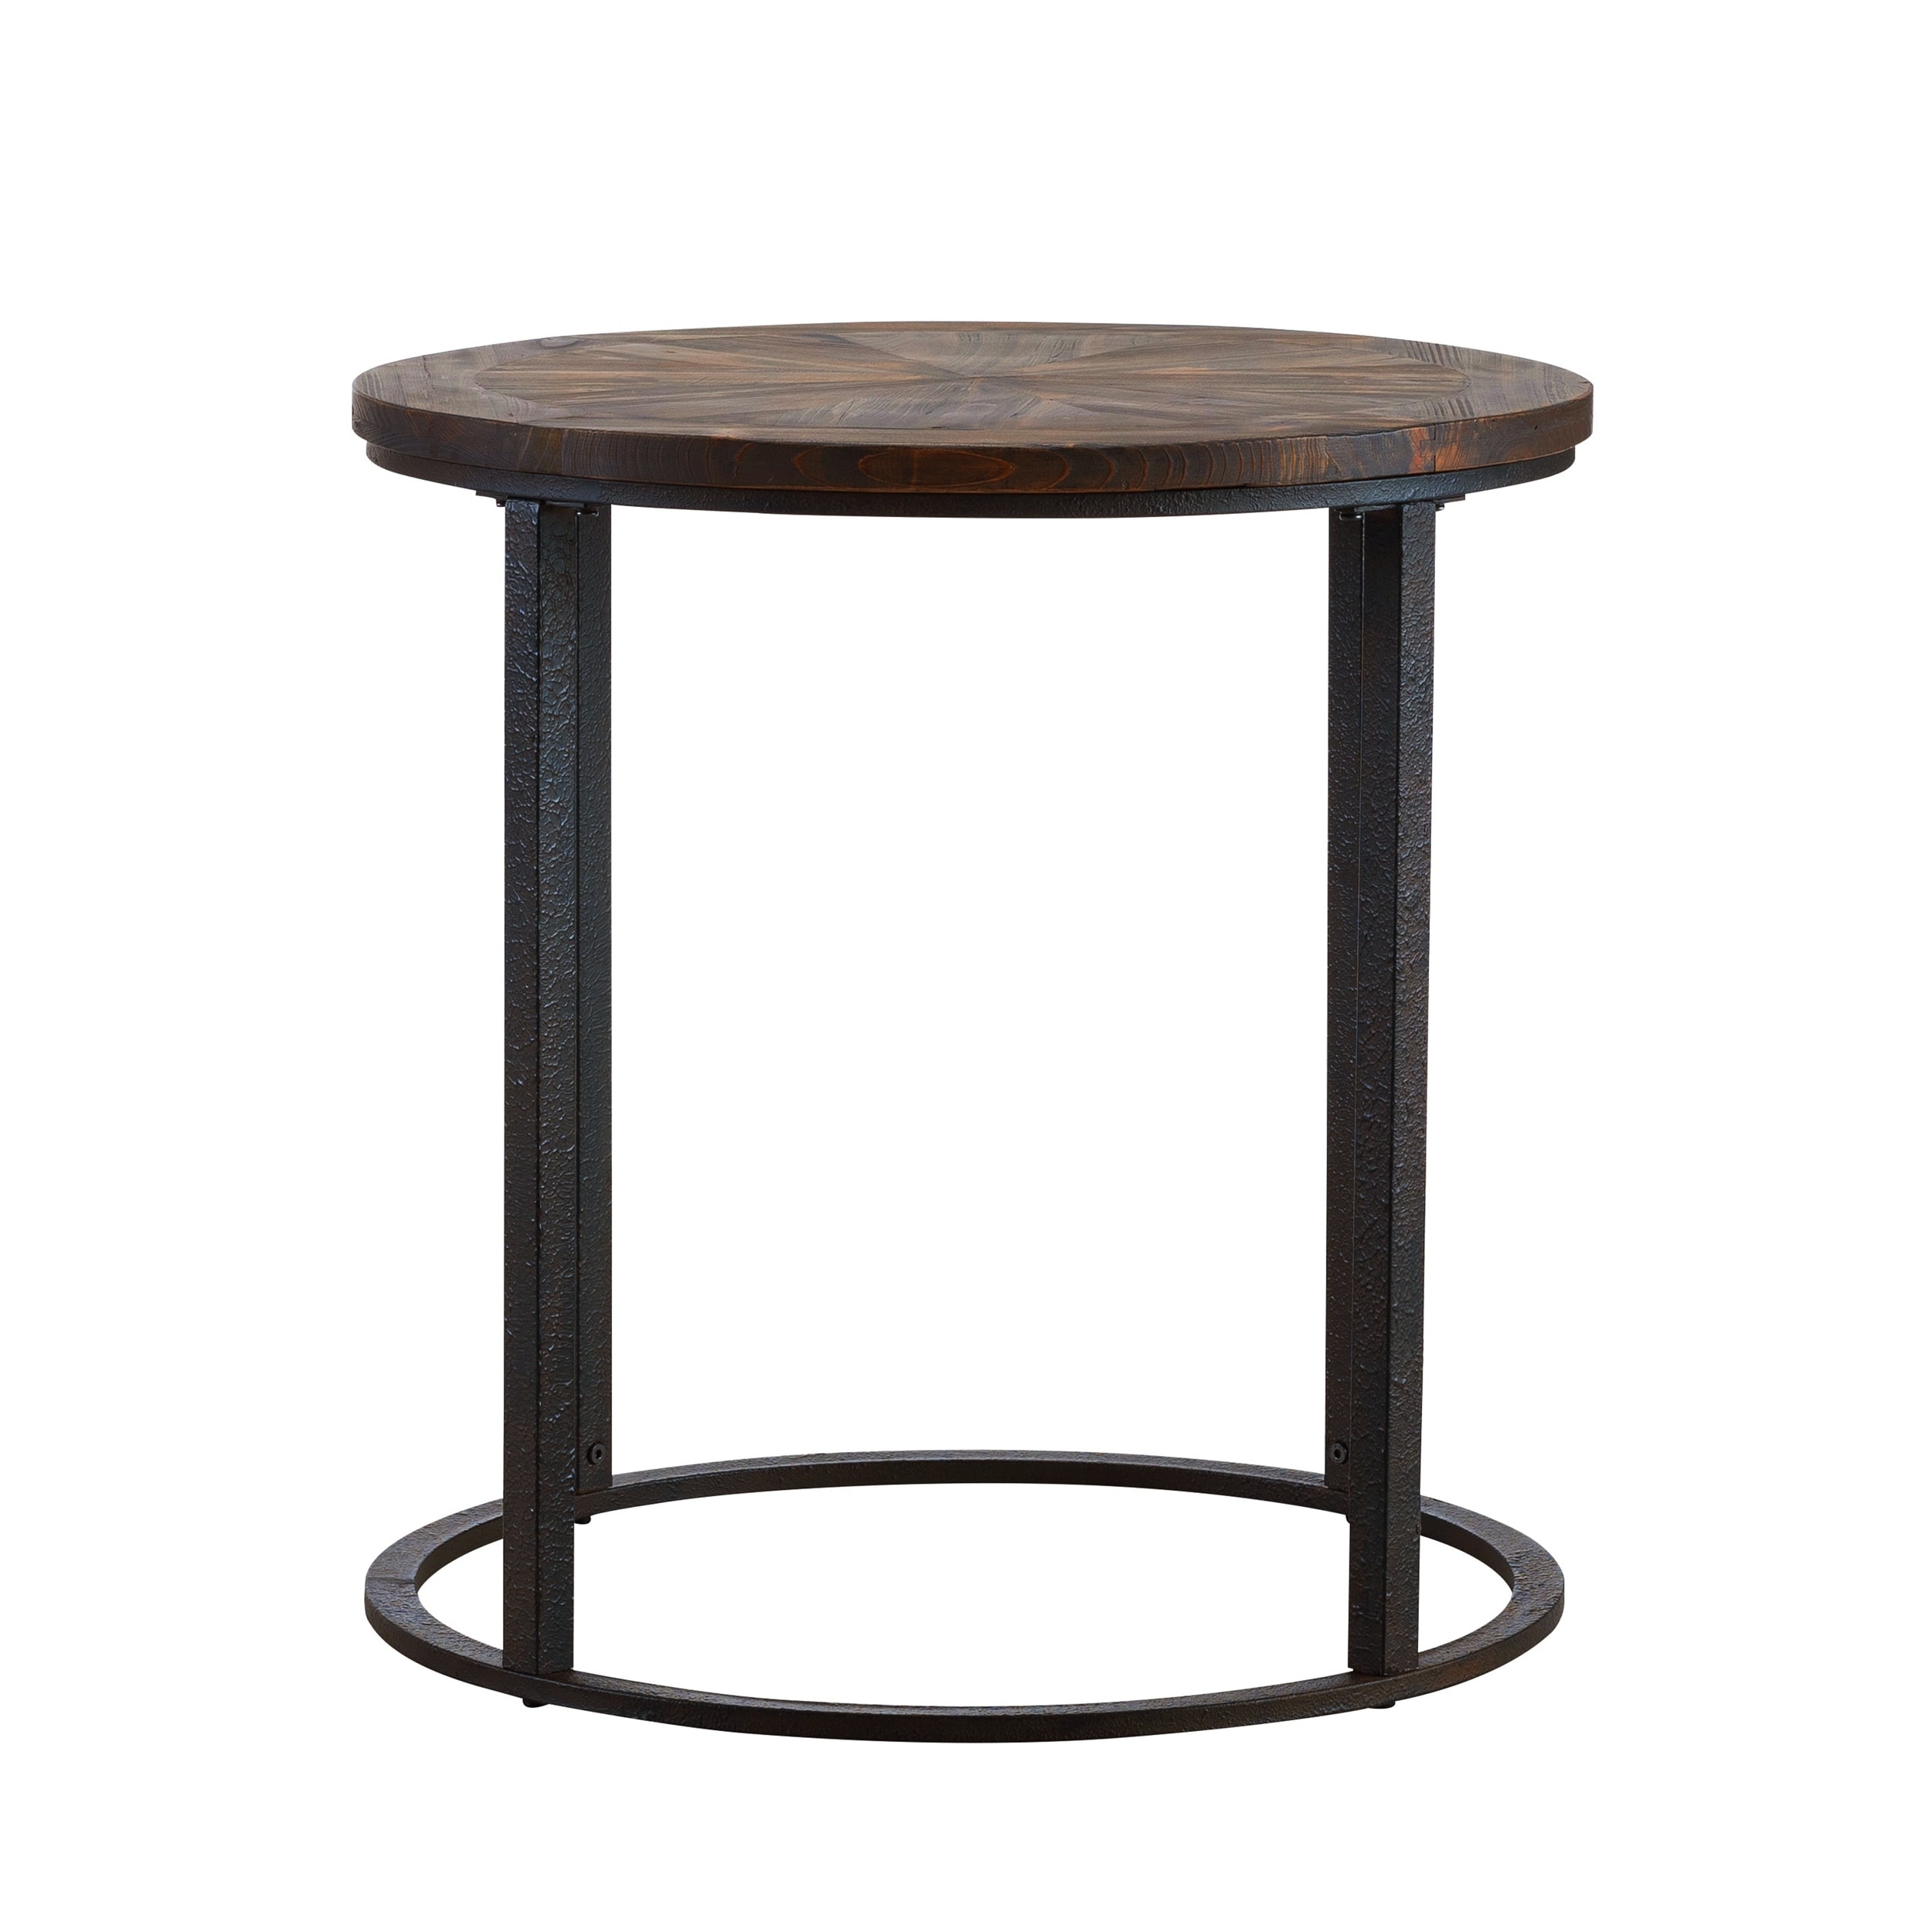 Details about   Round End Side Table Farmhouse Industrial Natural Wood Carved Plank Top Metal 